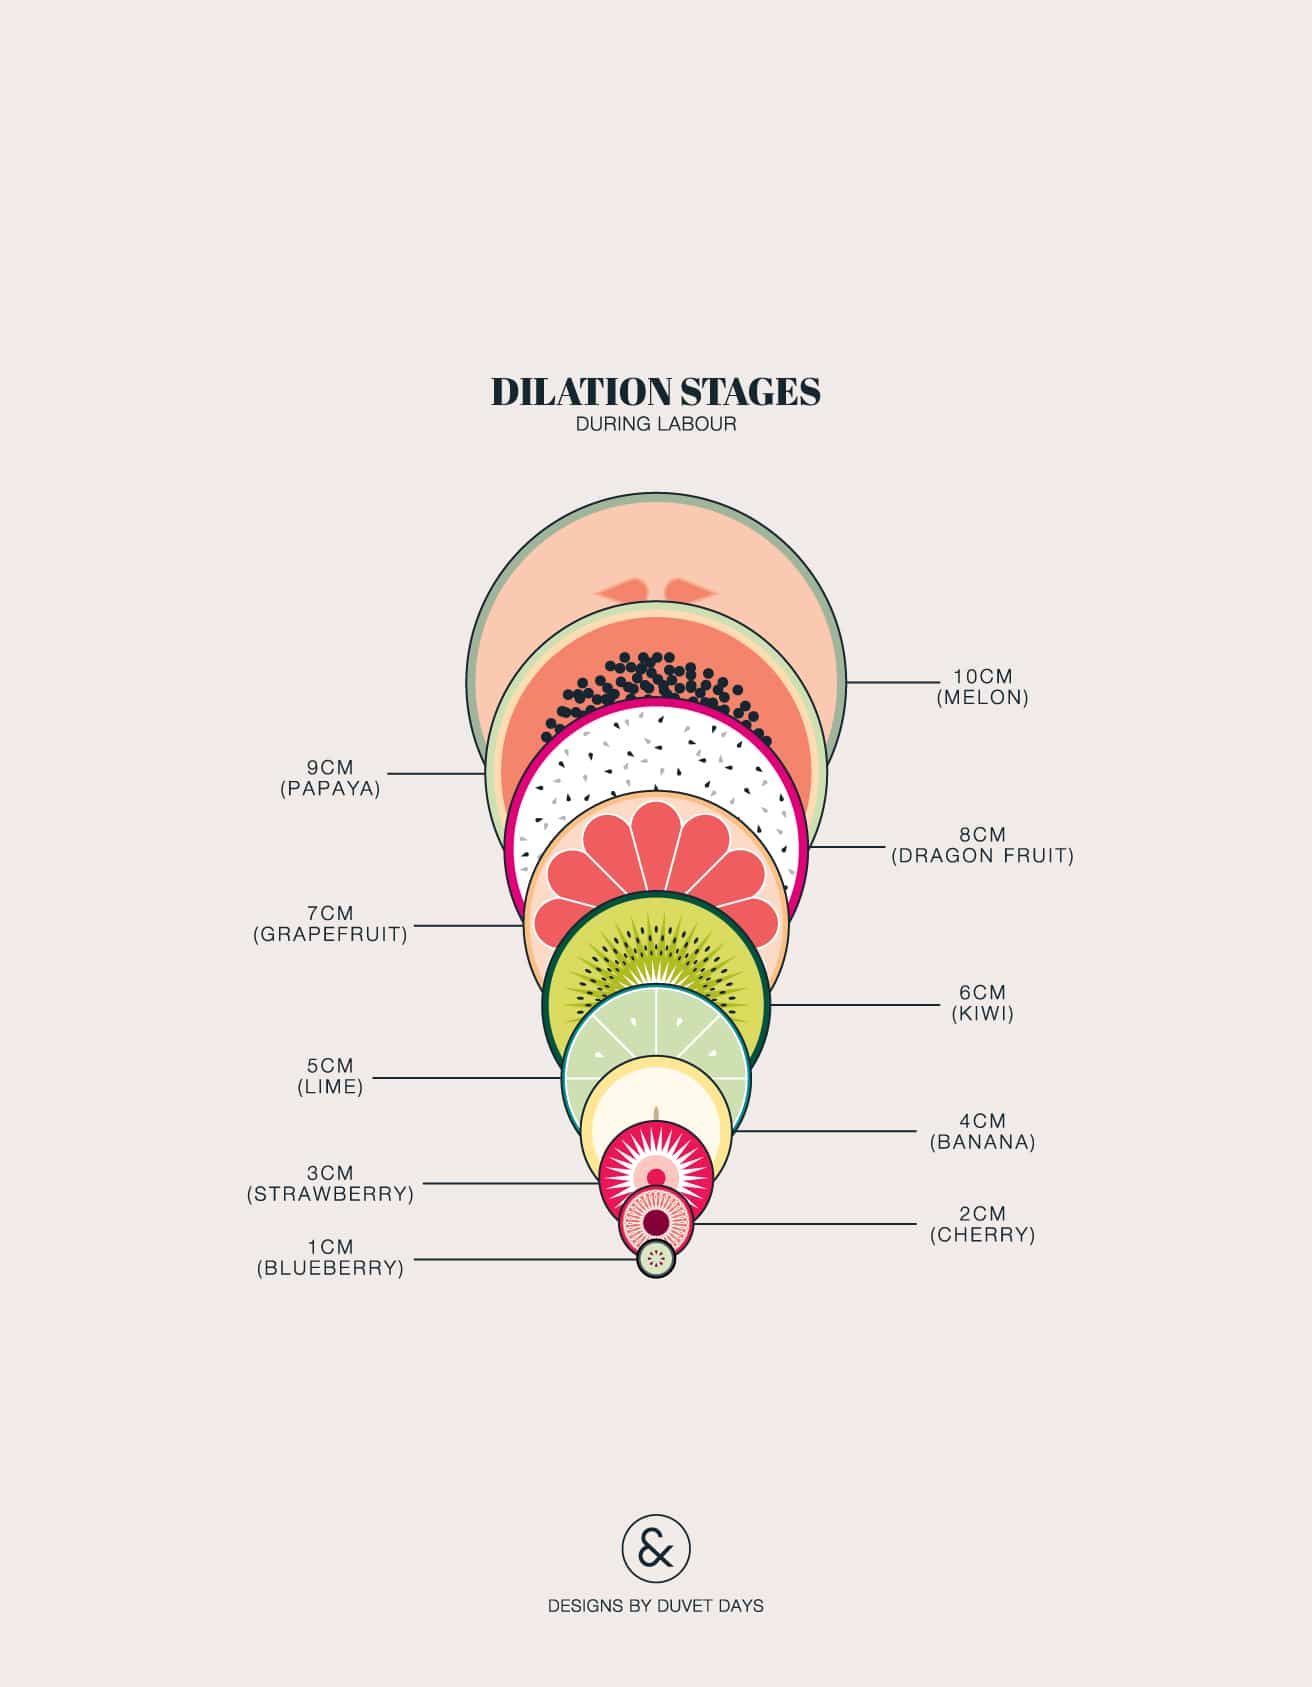 Dilation Stages During Labour - DesignsByDuvetDays